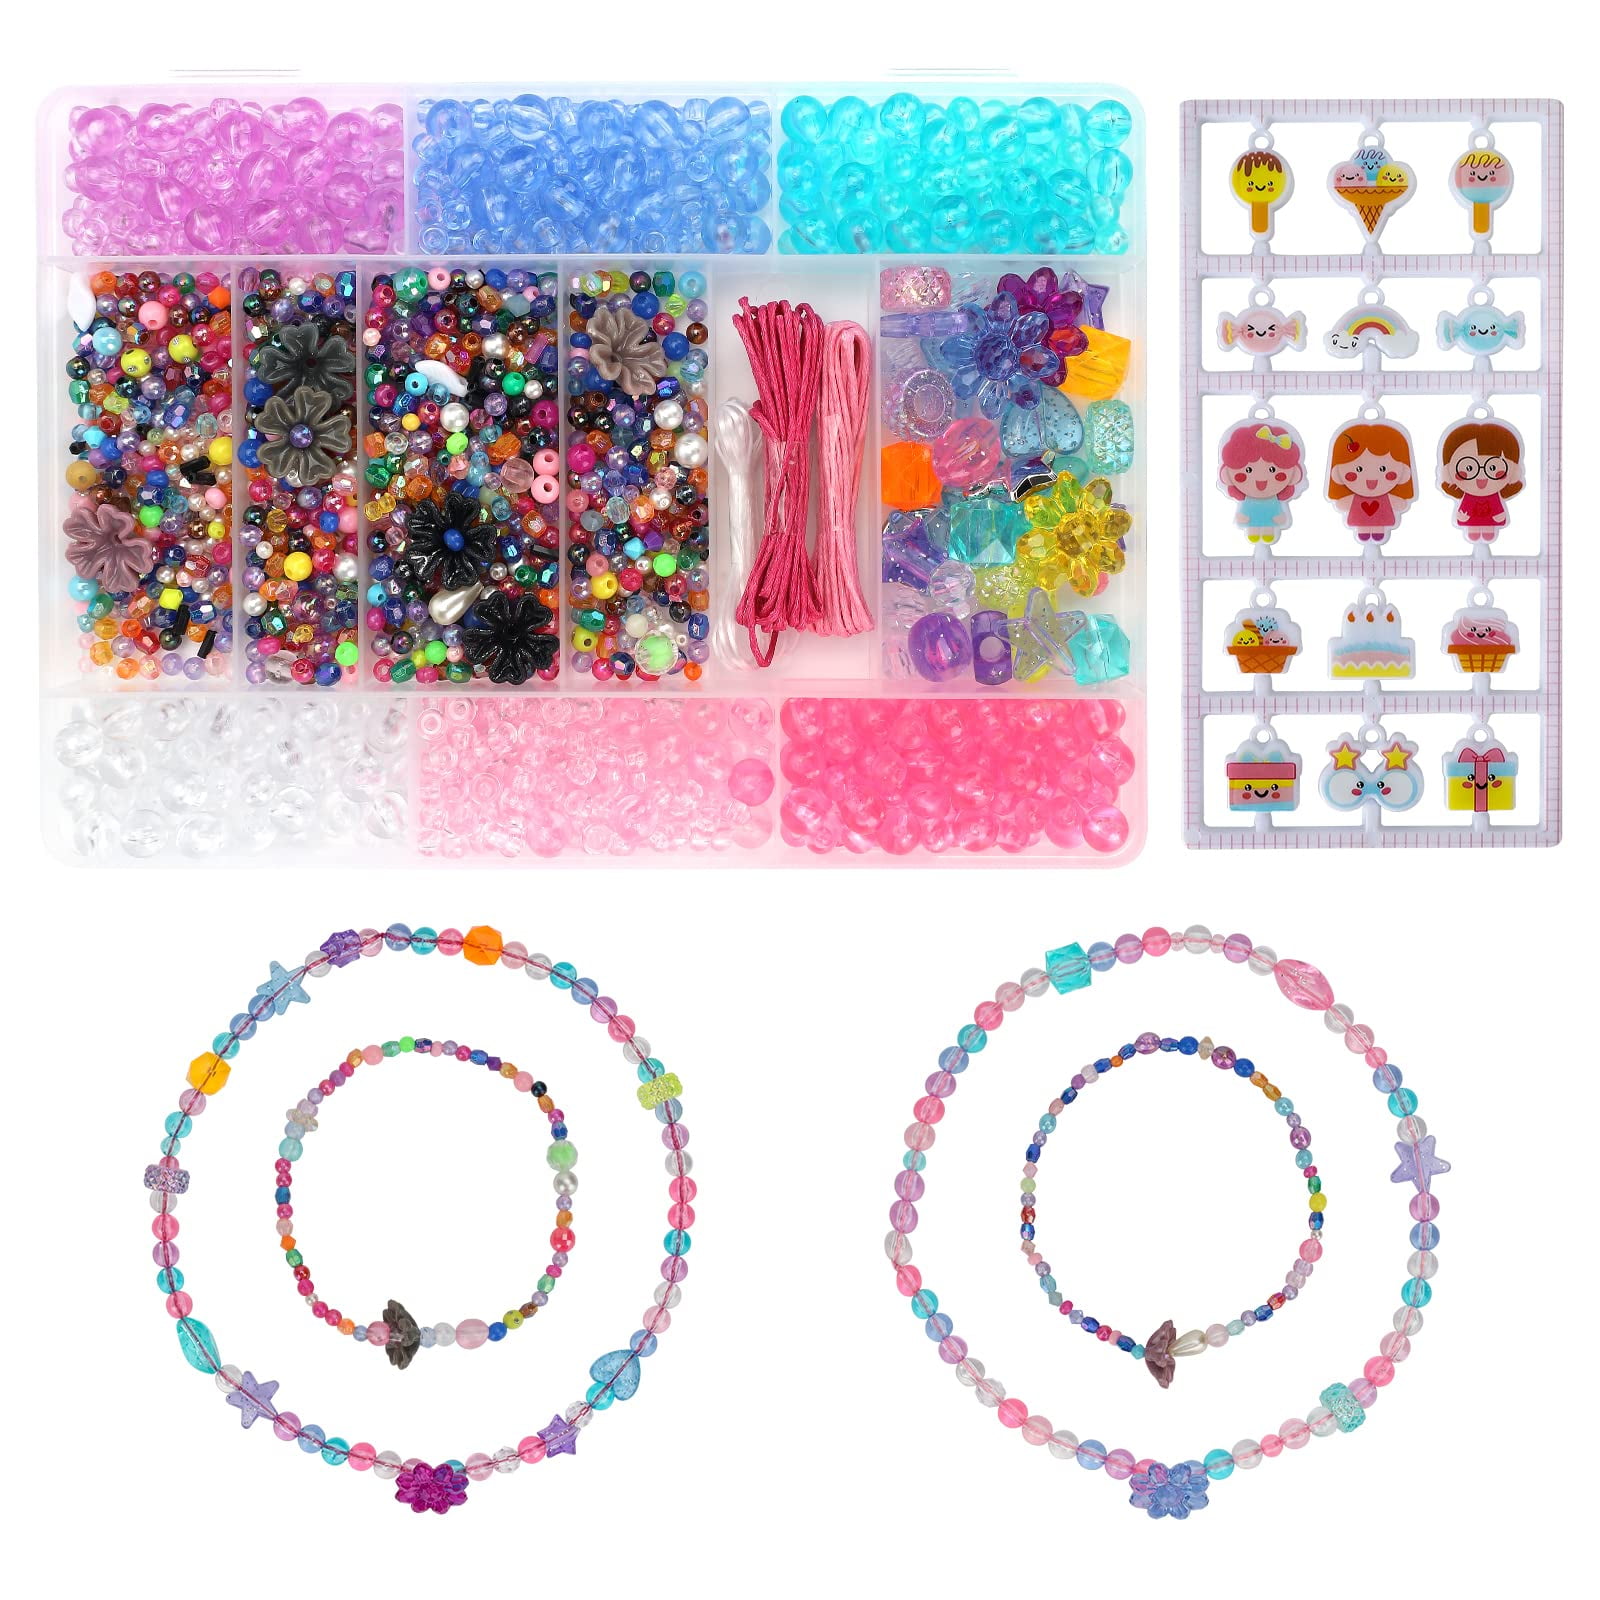 Niatsume Jewelry Making Kit for Girls 8-12,Bracelet Making Kit,DIY Red Beads Pendant Craft Supplies for Kids,Birthday Gifts for 5 6 7 8 9 10 11 12 Year Old